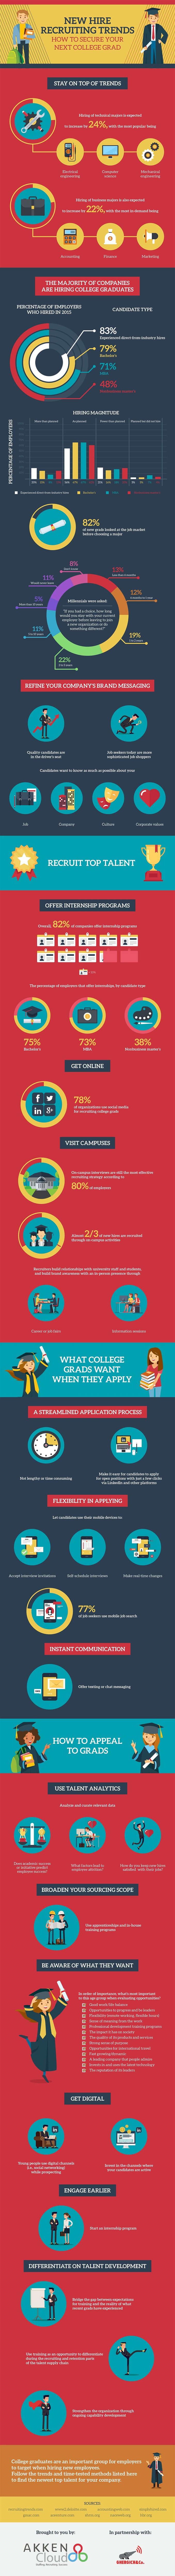 new-hire-recruiting-trends-how-to-secure-your-next-college-grad